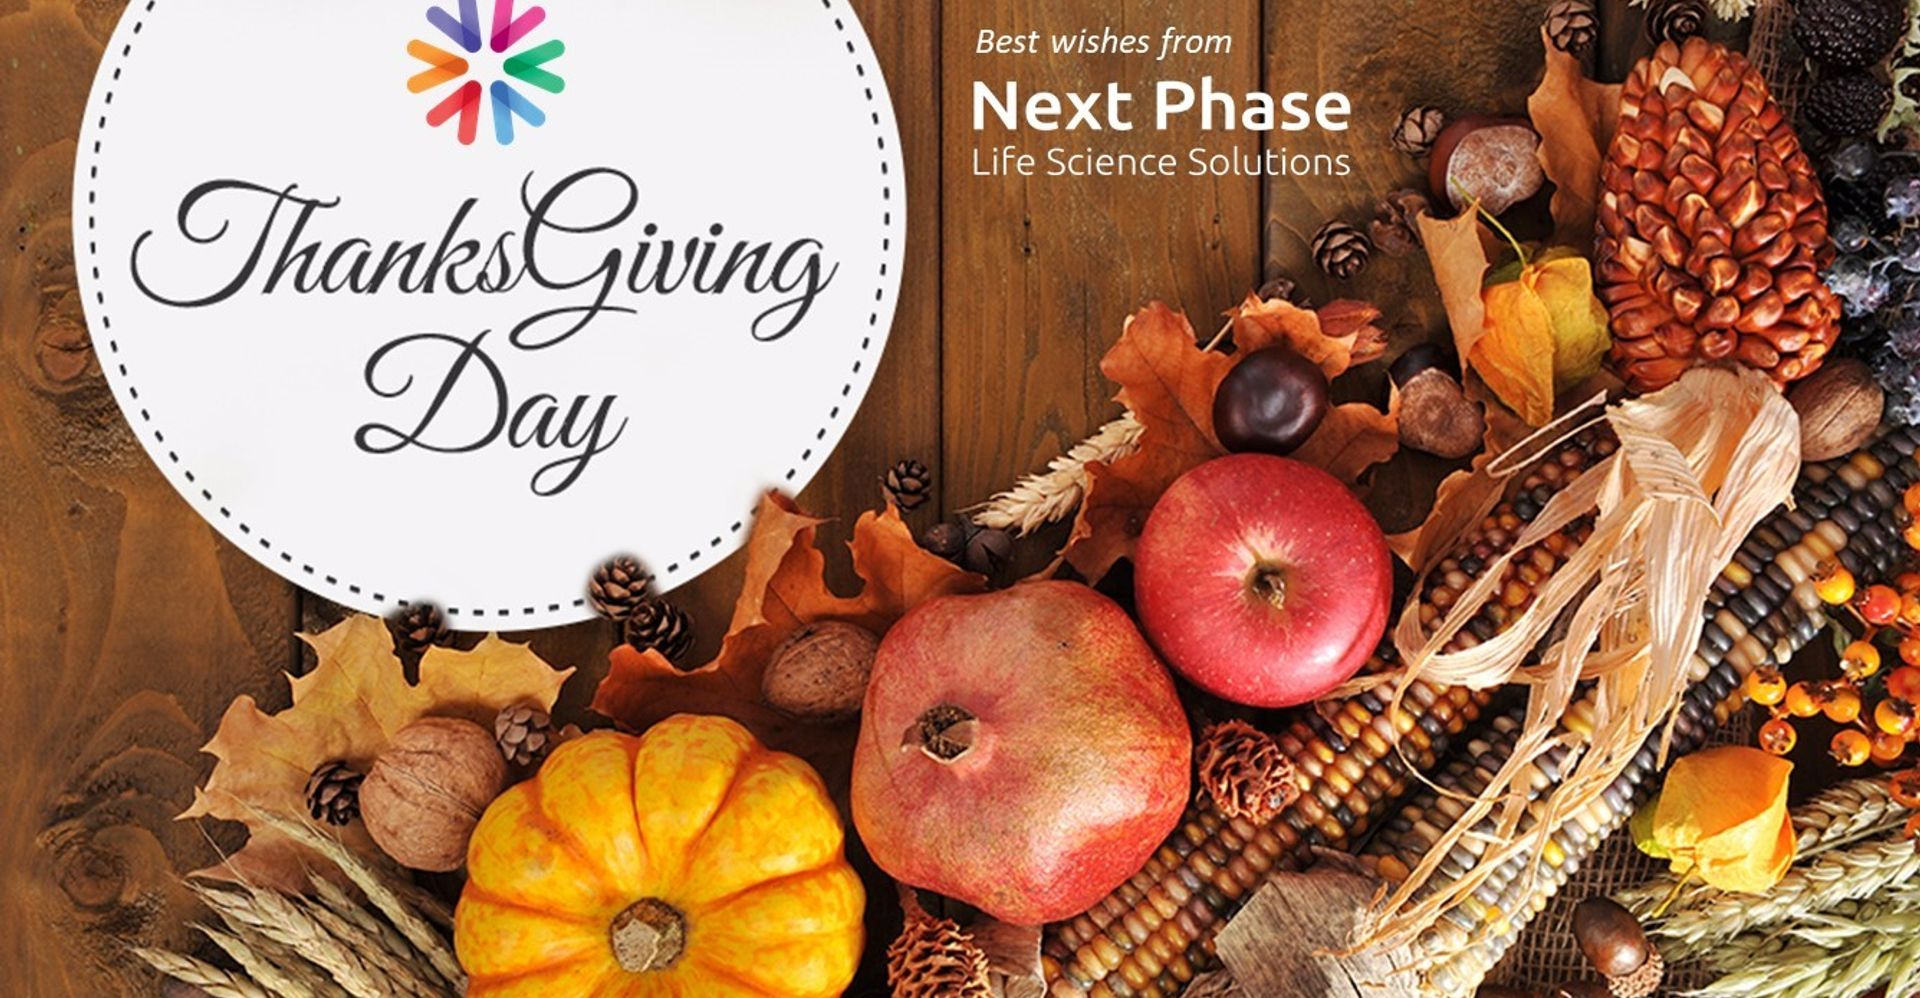 For us at Next Phase, our business is all about PEOPLE. It is about close collaboration, great communication, working through challenges, sharing helpful information, being available, and having fun in the process. This is the time of year for sharing what you’re thankful for.